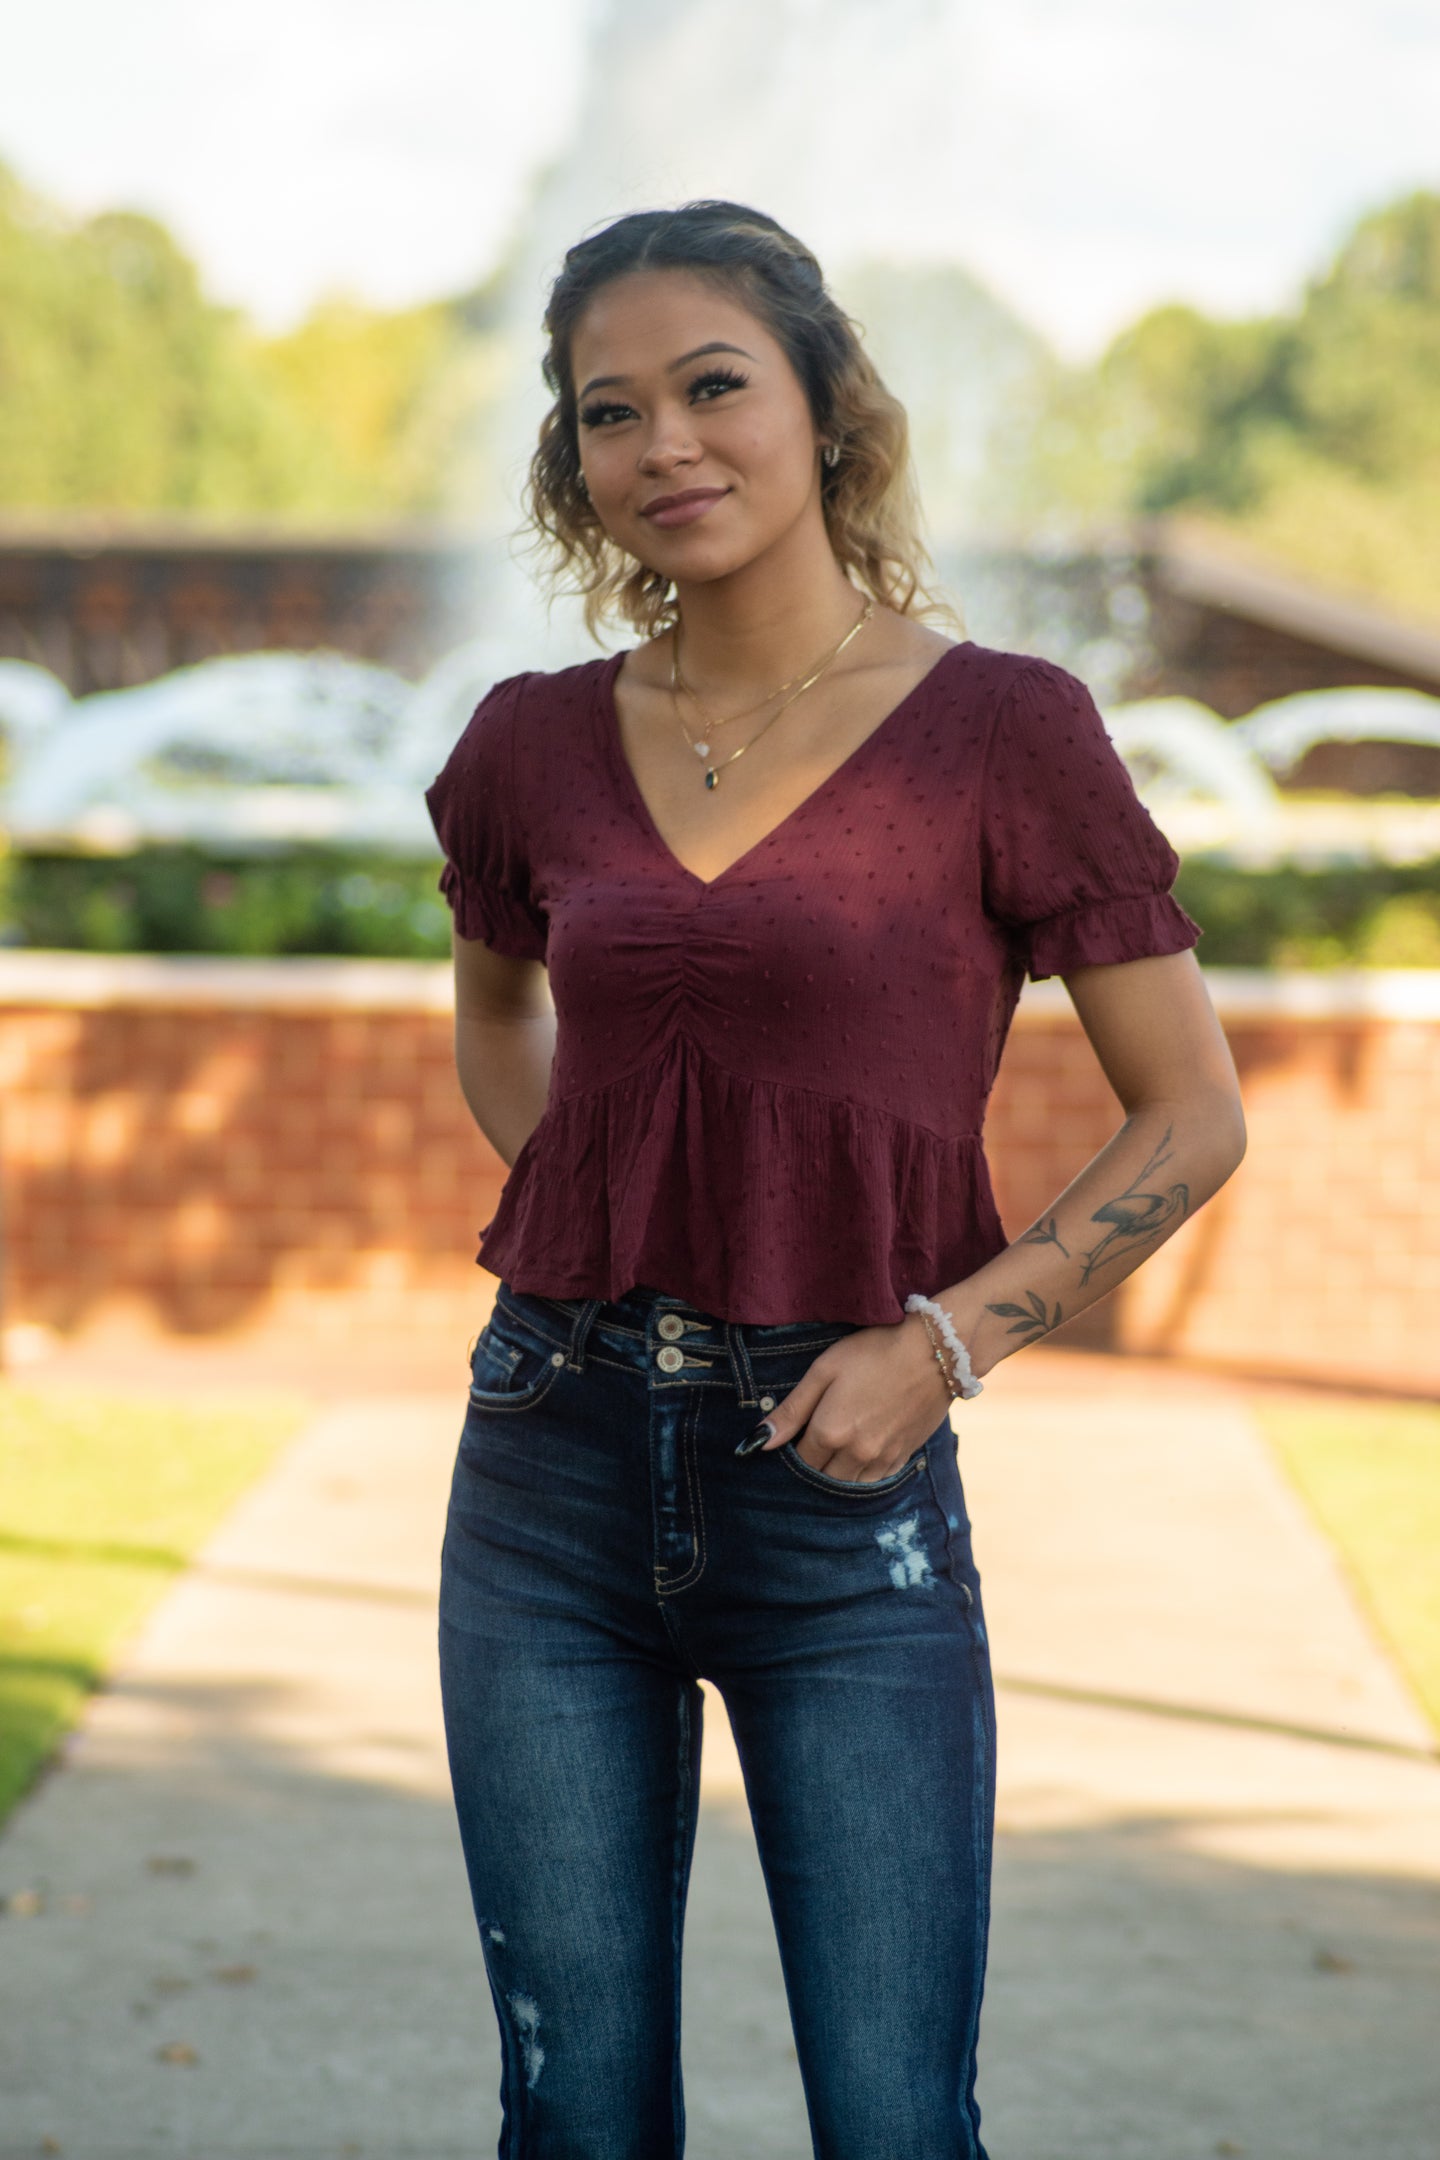 You're sure to love this wine colored baby doll top! There are so many dainty details to love! Match this top with a pair of black skinny jeans and black booties for an edgy look that is sure to turn heads!